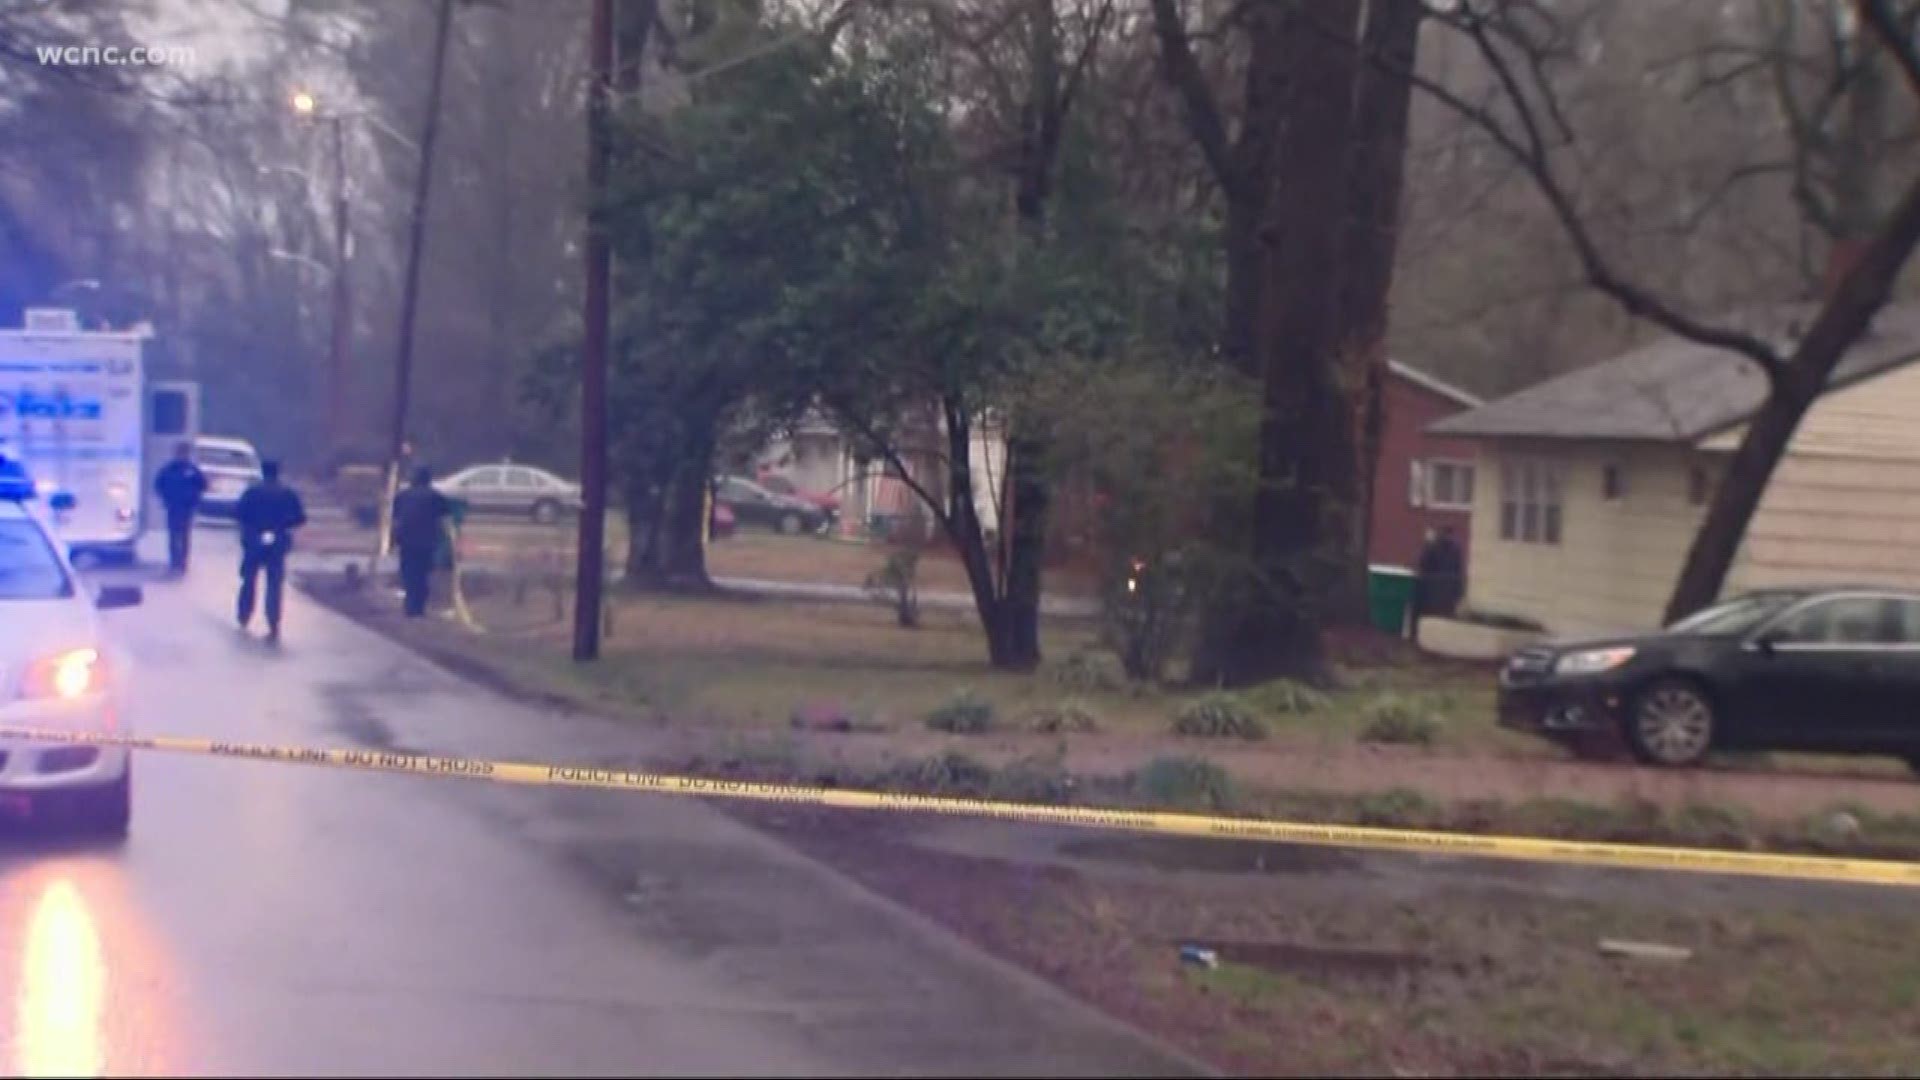 Charlotte-Mecklenburg Police identified the man shot and killed in a west Charlotte home early Wednesday morning. No arrests have been made.